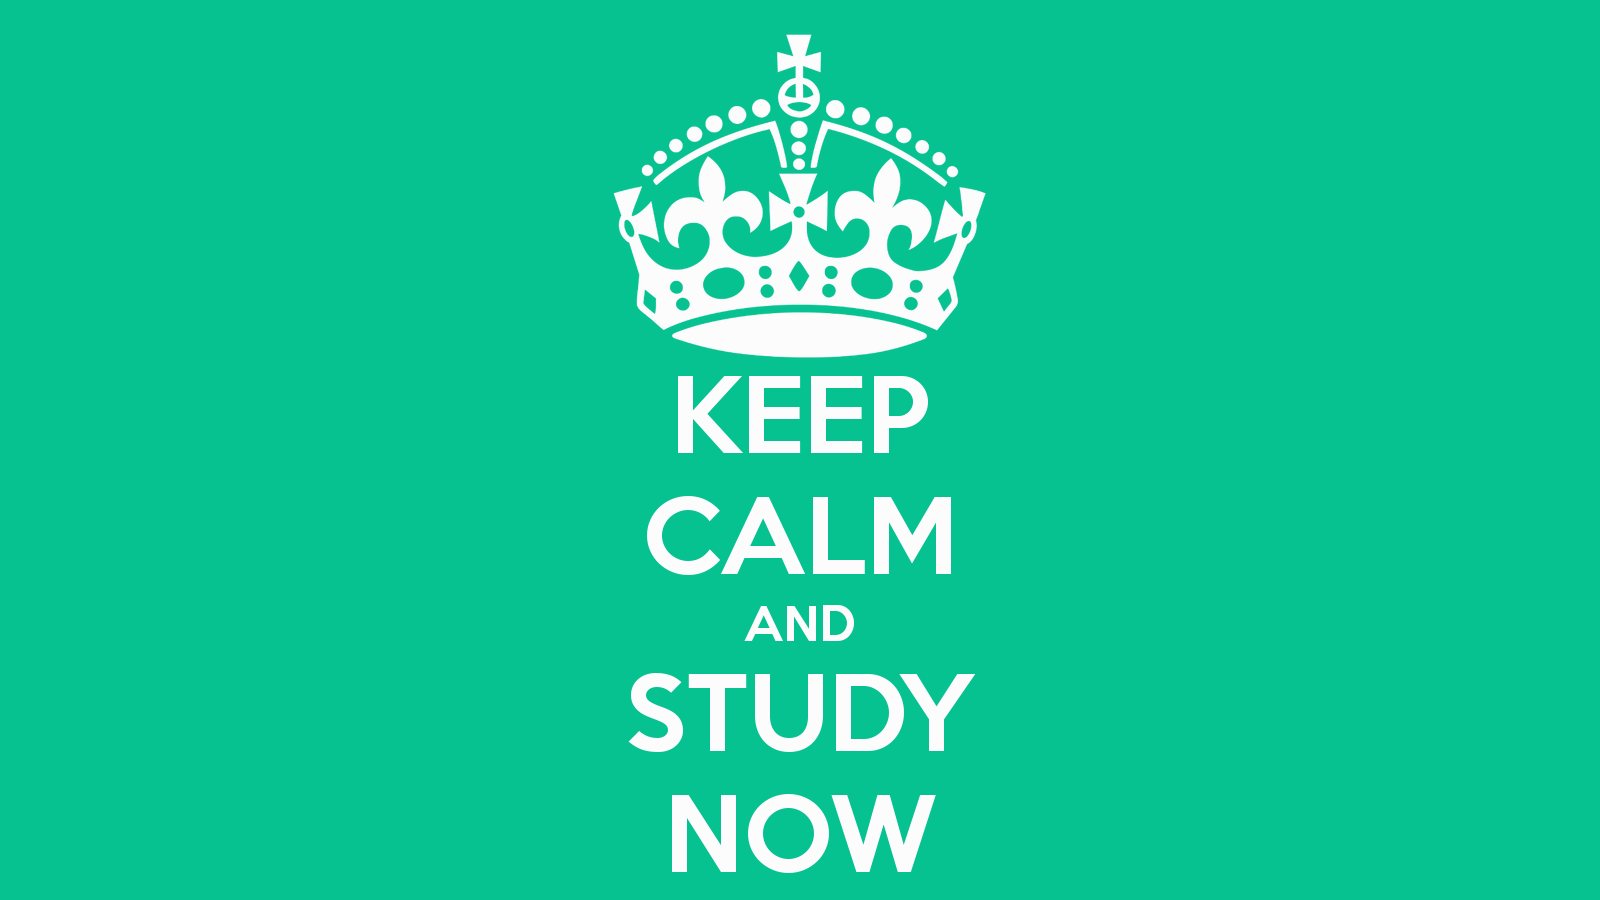 KEEP CALM AND STUDY NOW CALM AND CARRY ON Image Generator